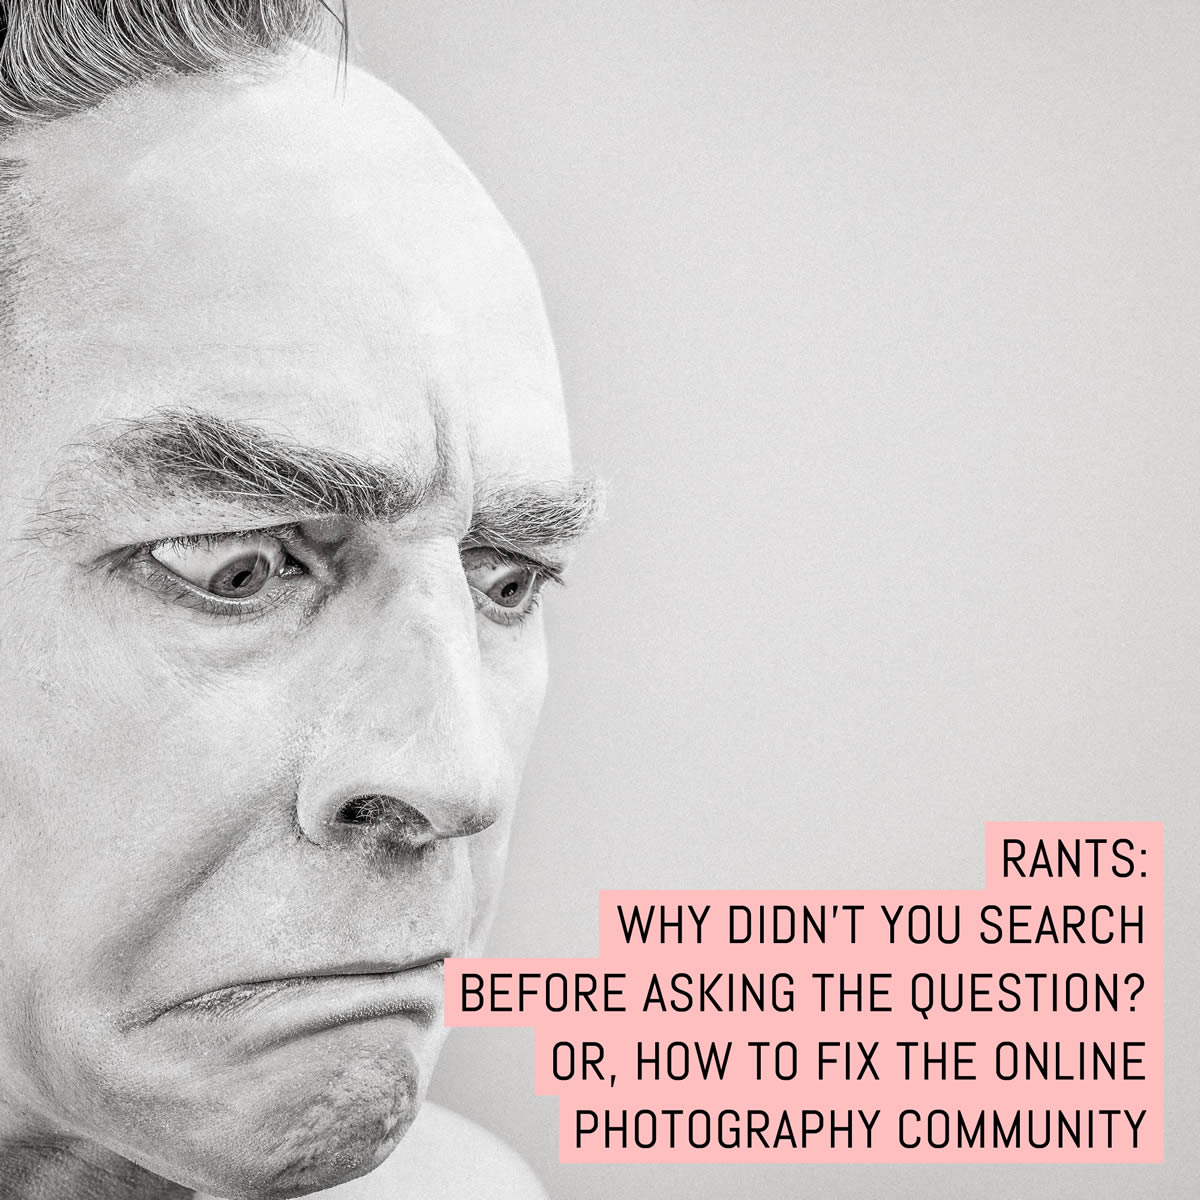 Rants: Why didn't you search before asking the question- Or, how to fix the online photography community